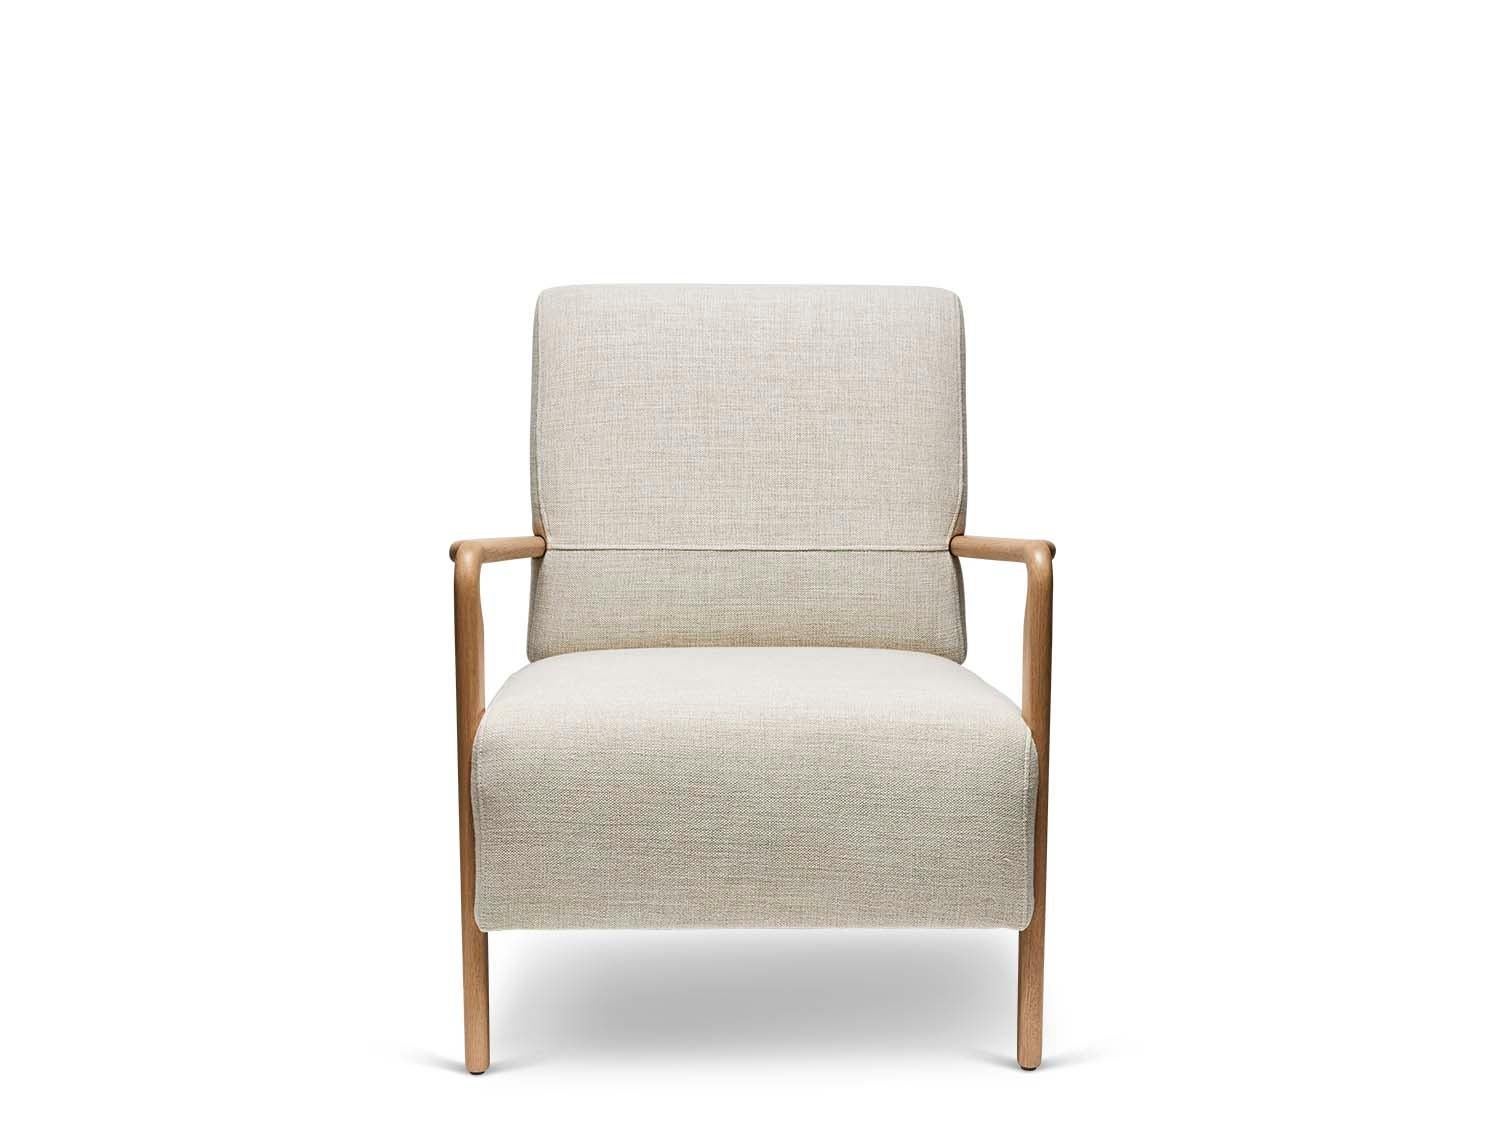 The Niguel lounge chair is a French inspired design with a sculptural solid wood frame and an upholstered seat. 

The Lawson-Fenning Collection is designed and handmade in Los Angeles, California. Reach out to discover what options are currently